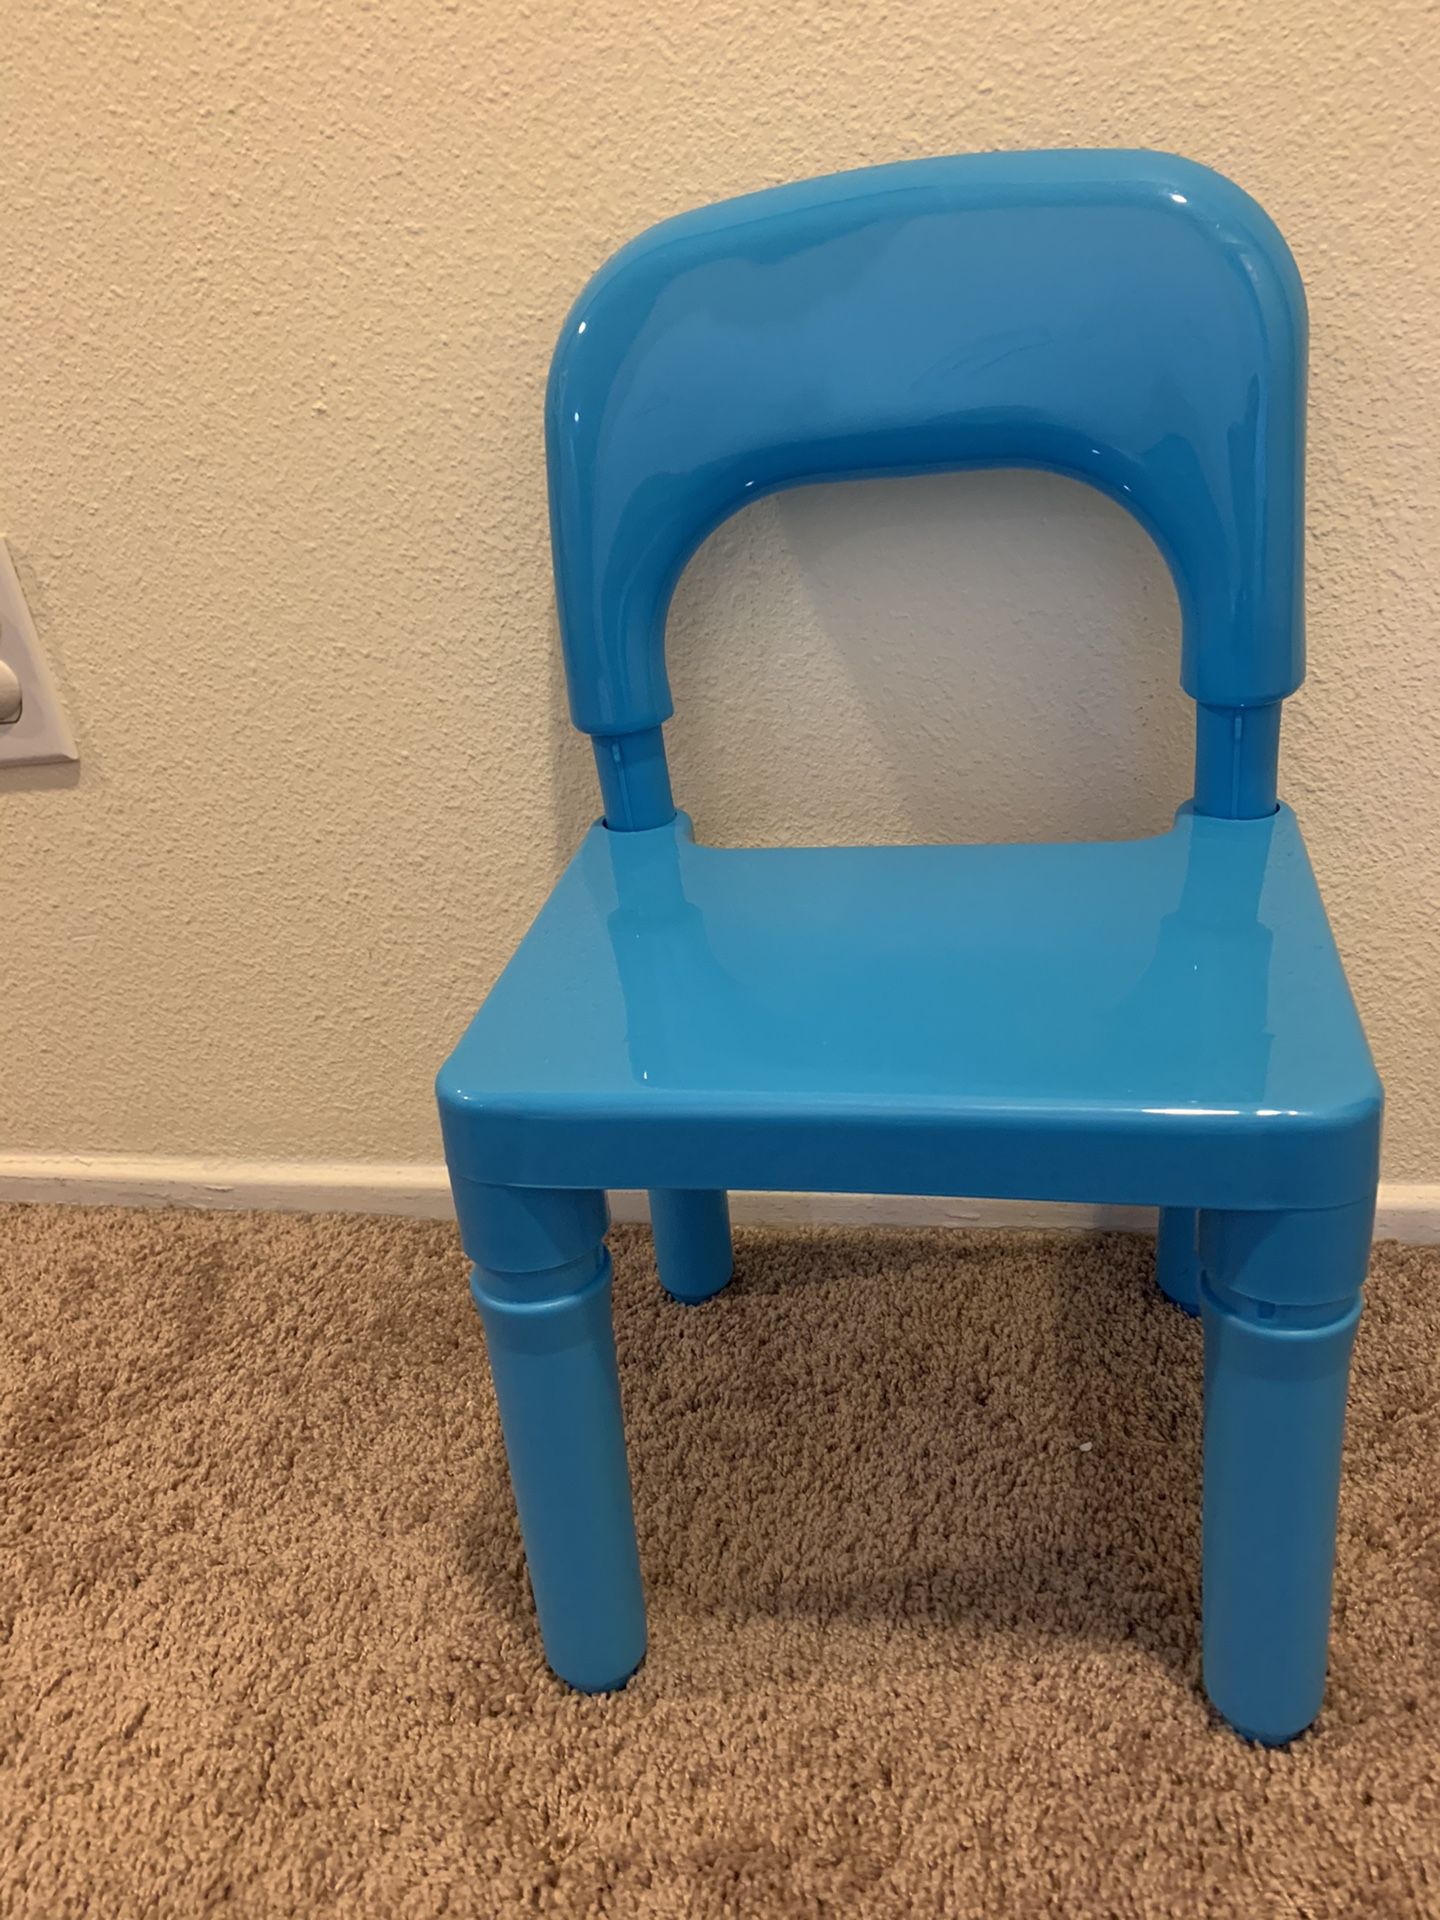 Blue plastic chair for kids